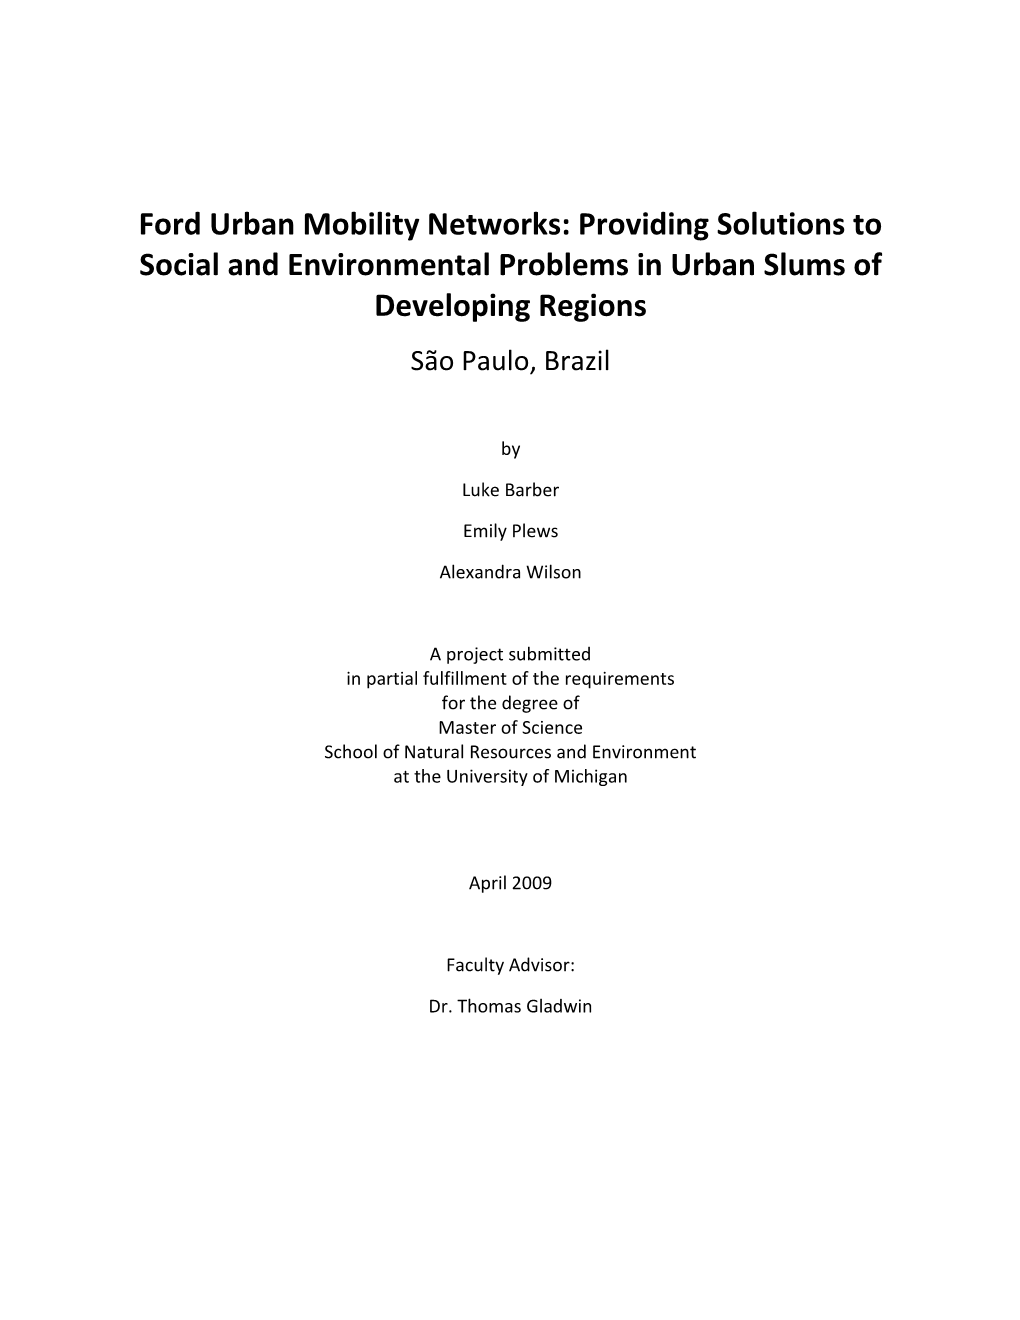 Ford Urban Mobility Networks: Providing Solutions to Social and Environmental Problems in Urban Slums of Developing Regions São Paulo, Brazil